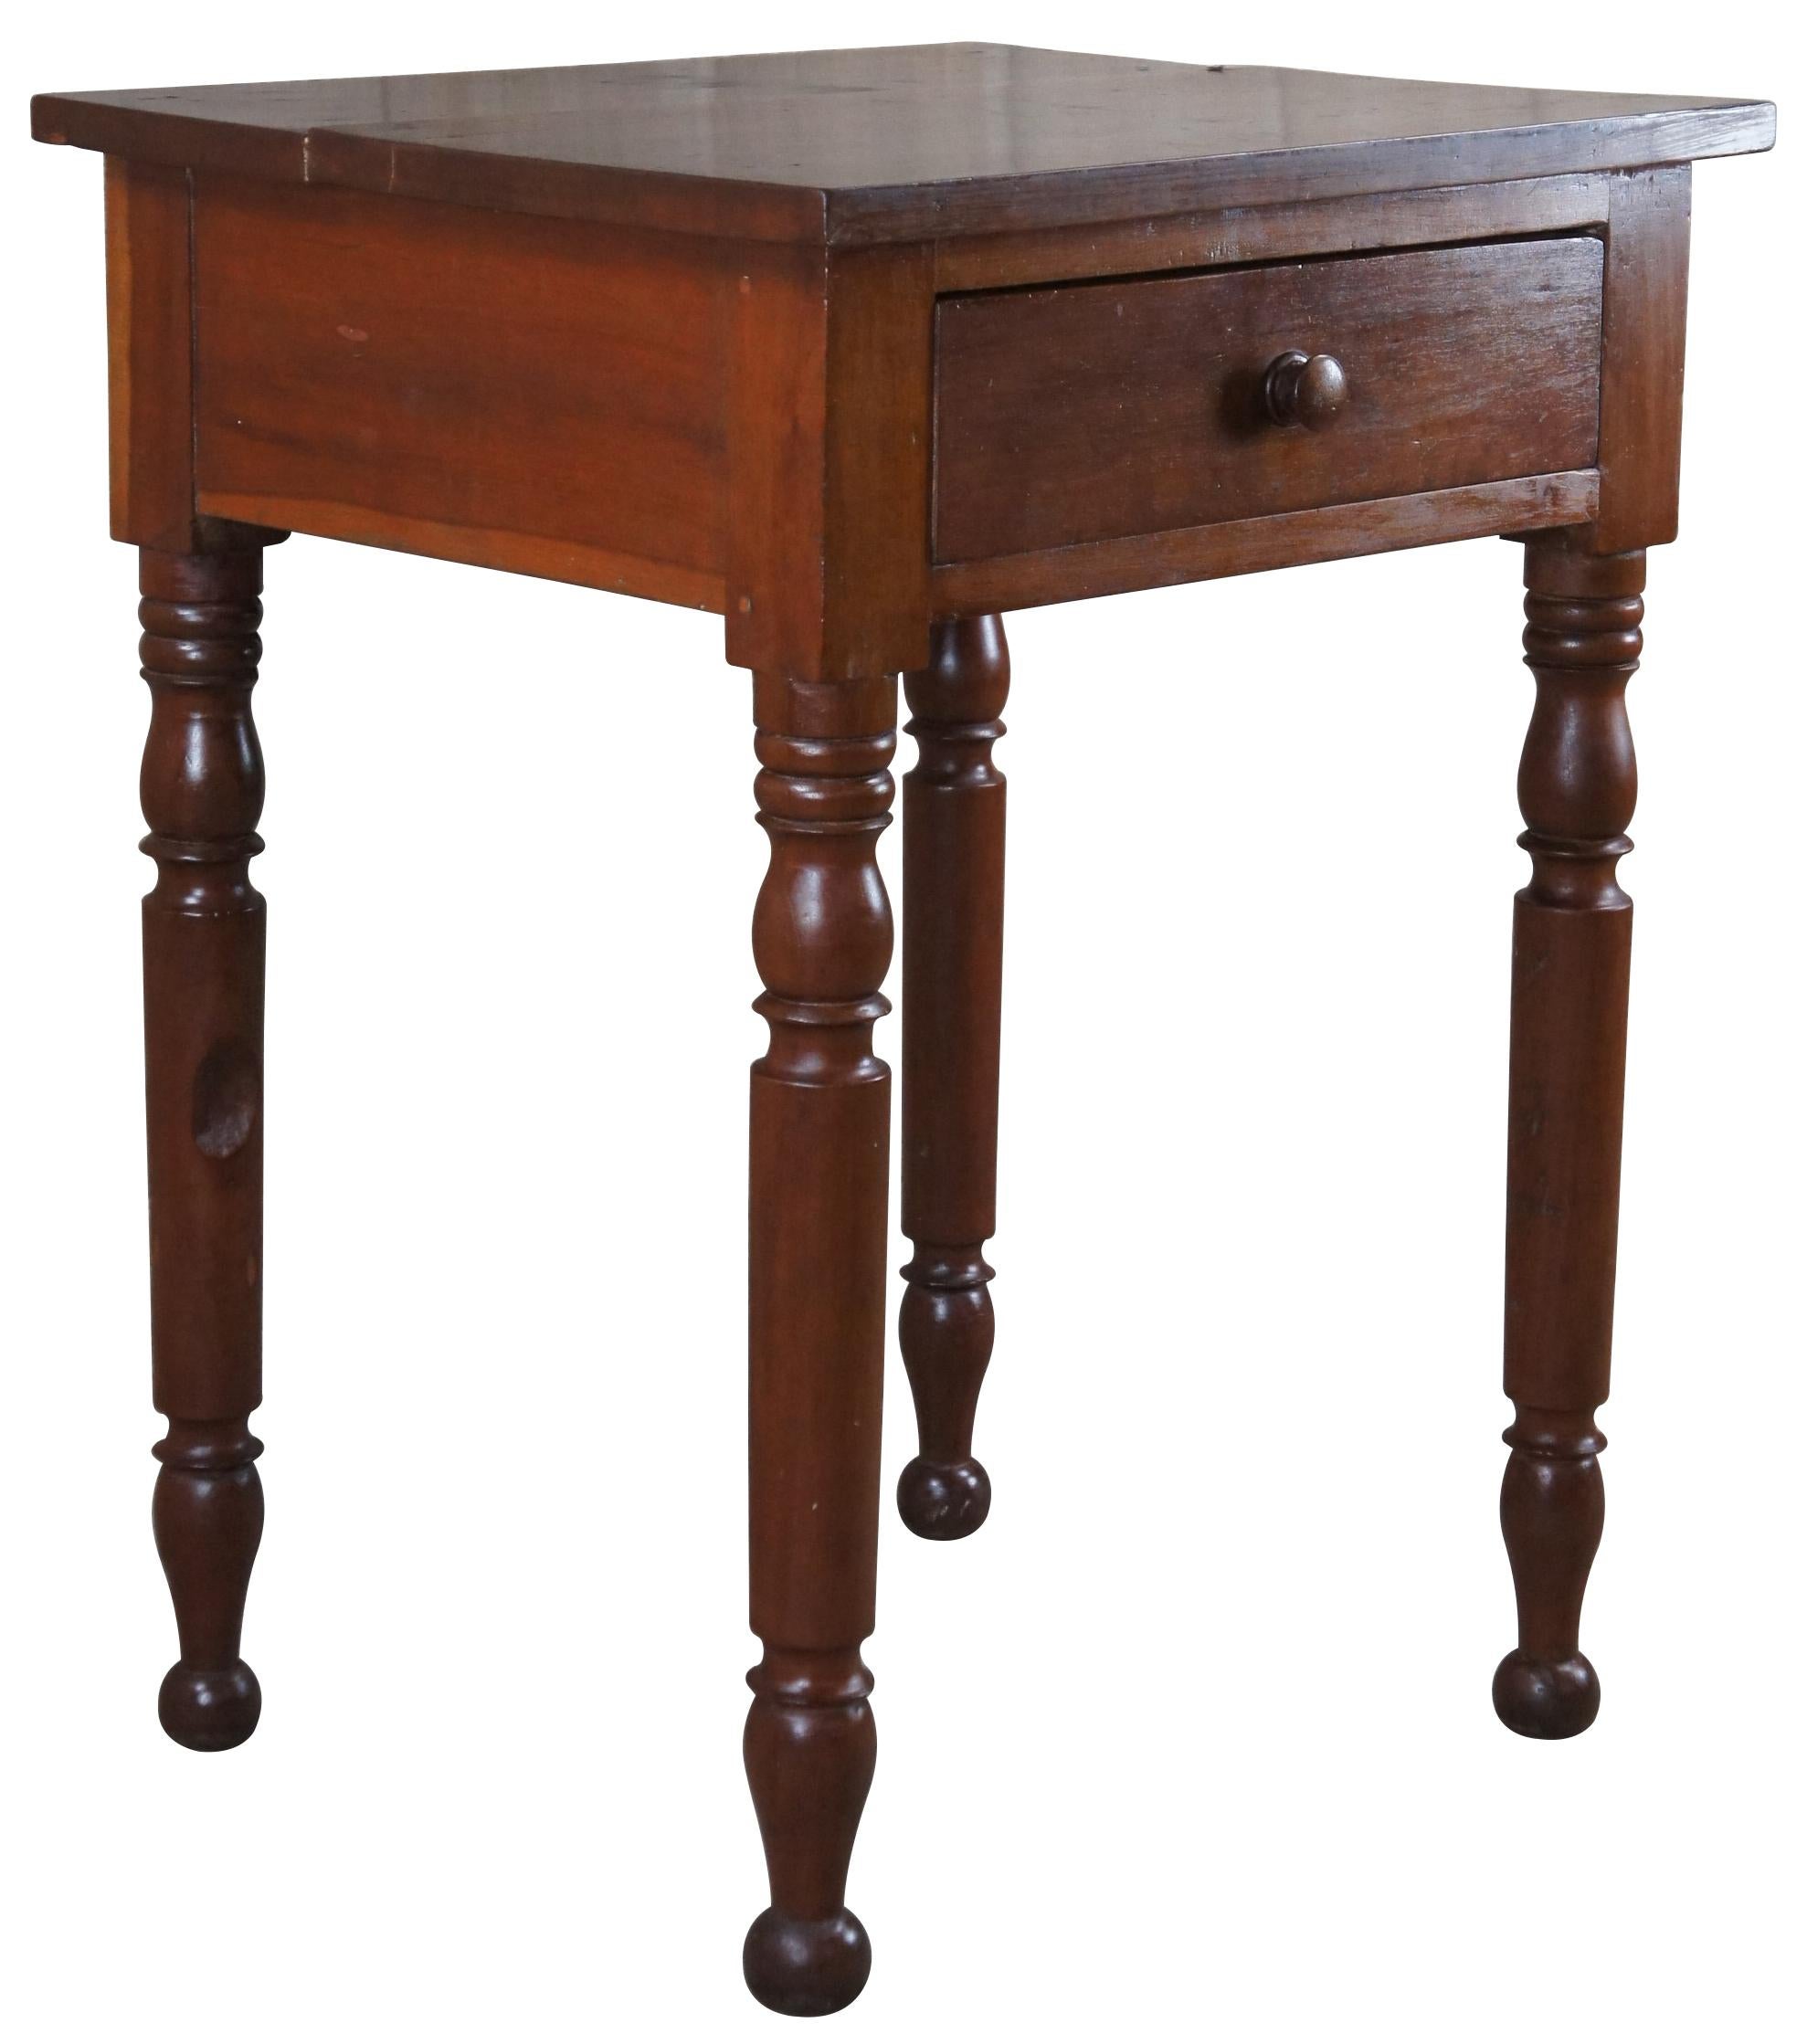 Antique Early American 19th century side table. Made of cherry featuring rectangular form with one drawer, turned legs and hand planing and dovetailing.